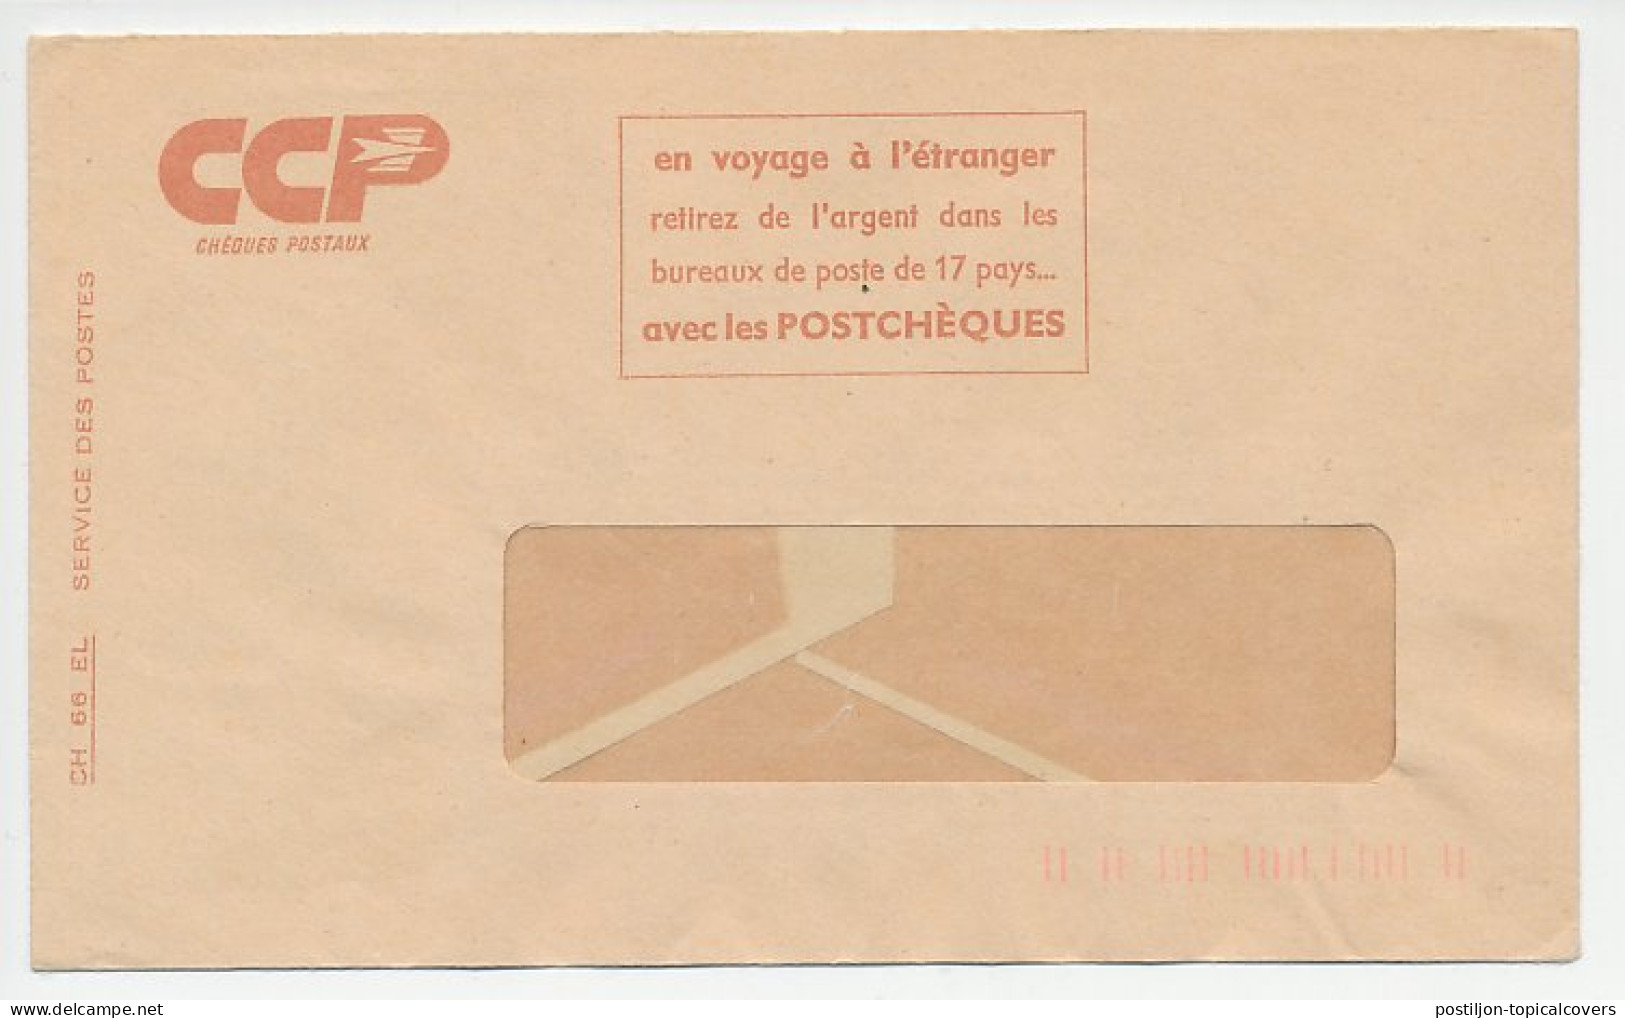 Postal Cheque Cover France Clothing Patterns - Scissors - Kostüme